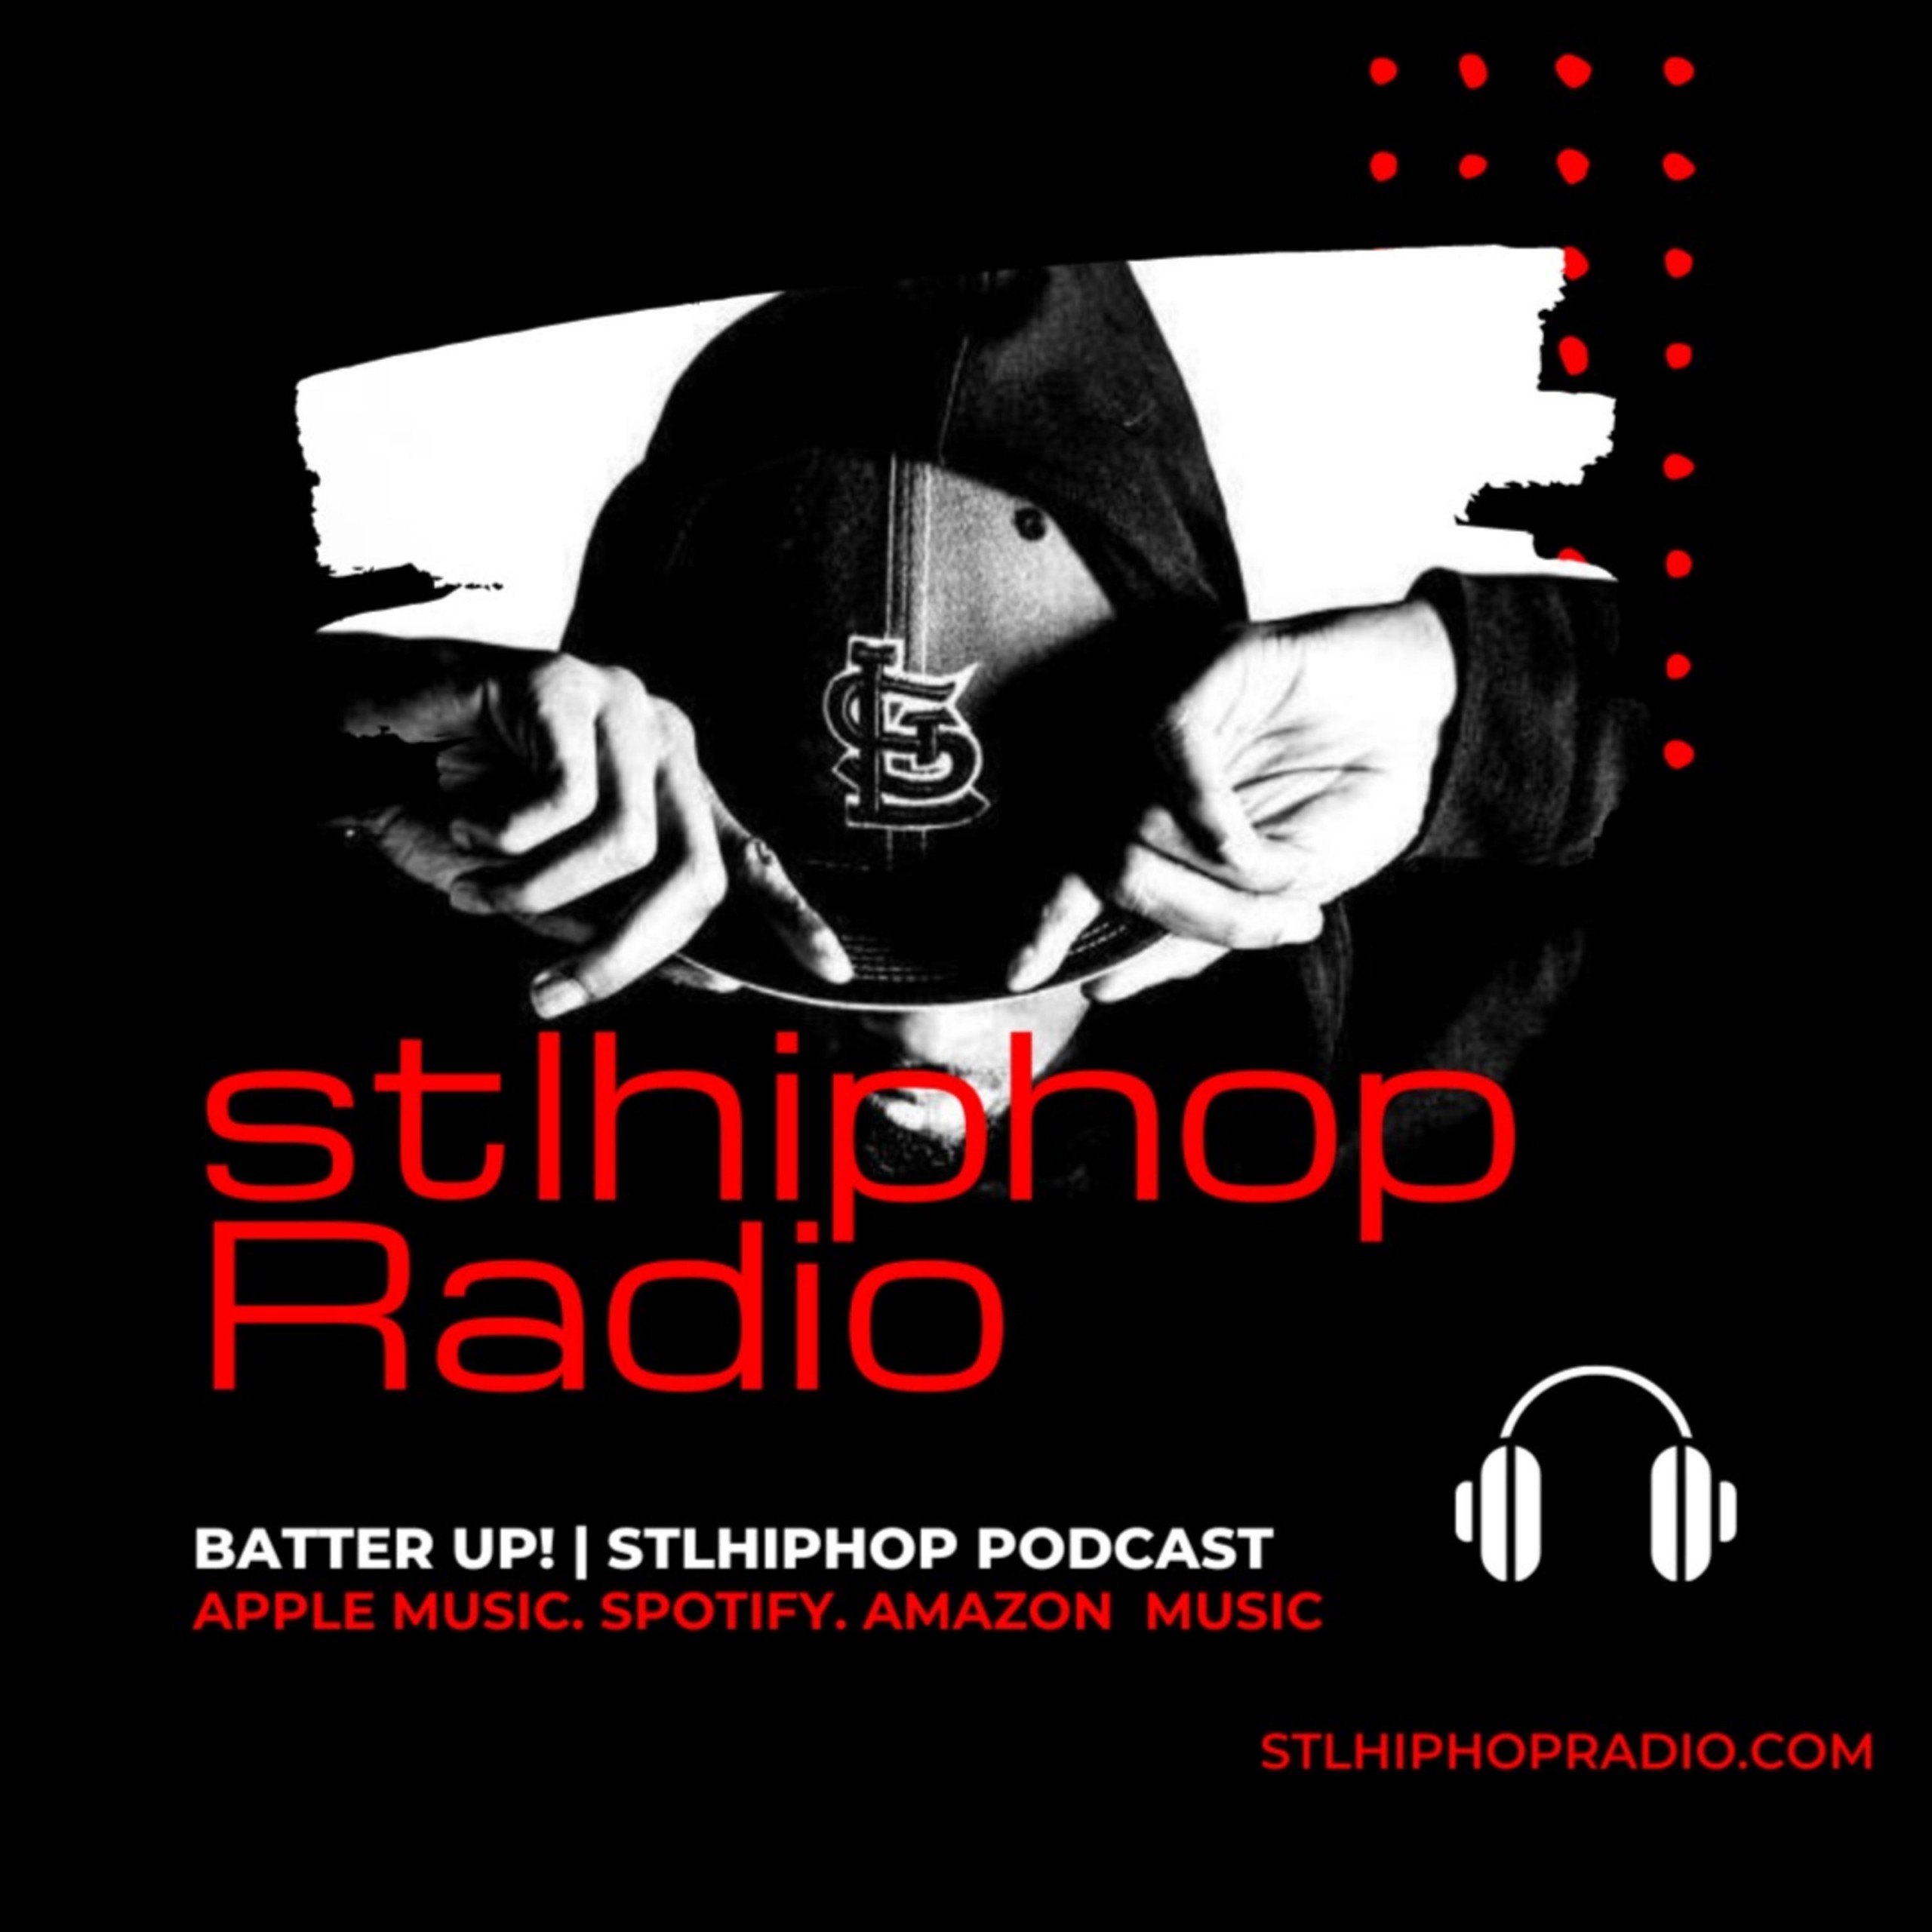 Batter Up! | stlhiphop Podcast The Real Reason Saint Louis Hip Hop Fell Off